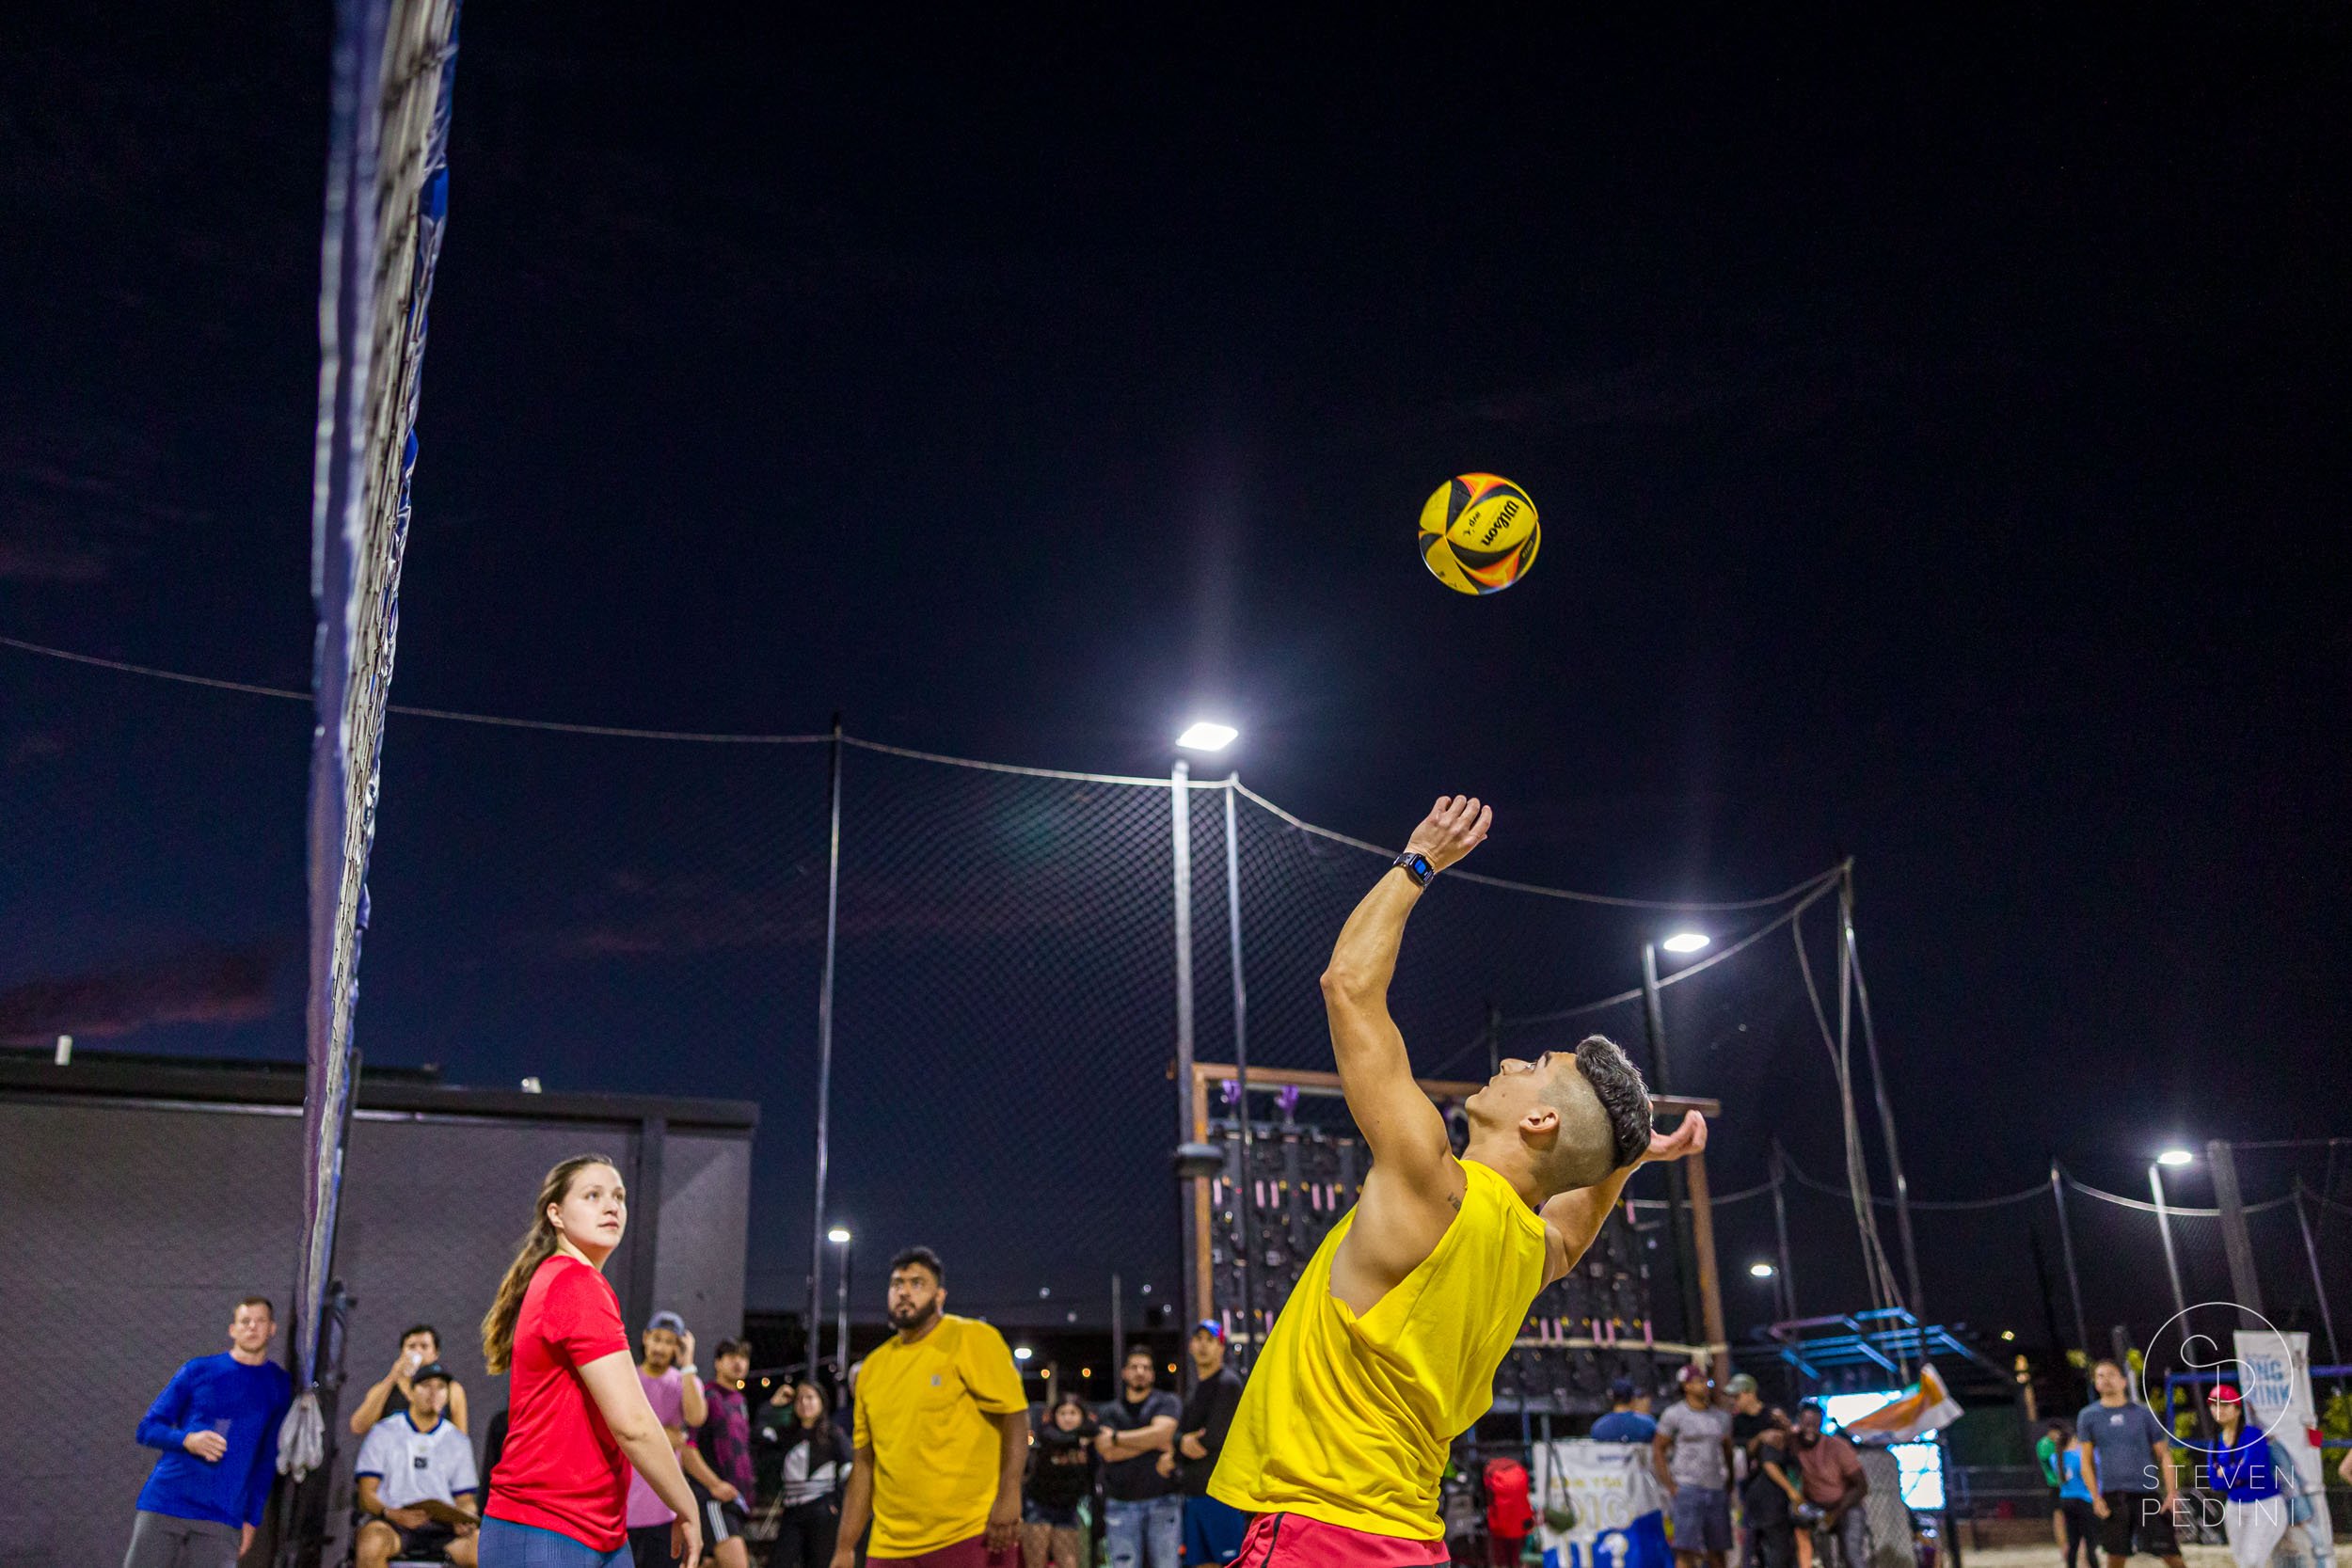 Steven Pedini Photography - Bumpy Pickle - Sand Volleyball - Houston TX - World Cup of Volleyball - 00365.jpg